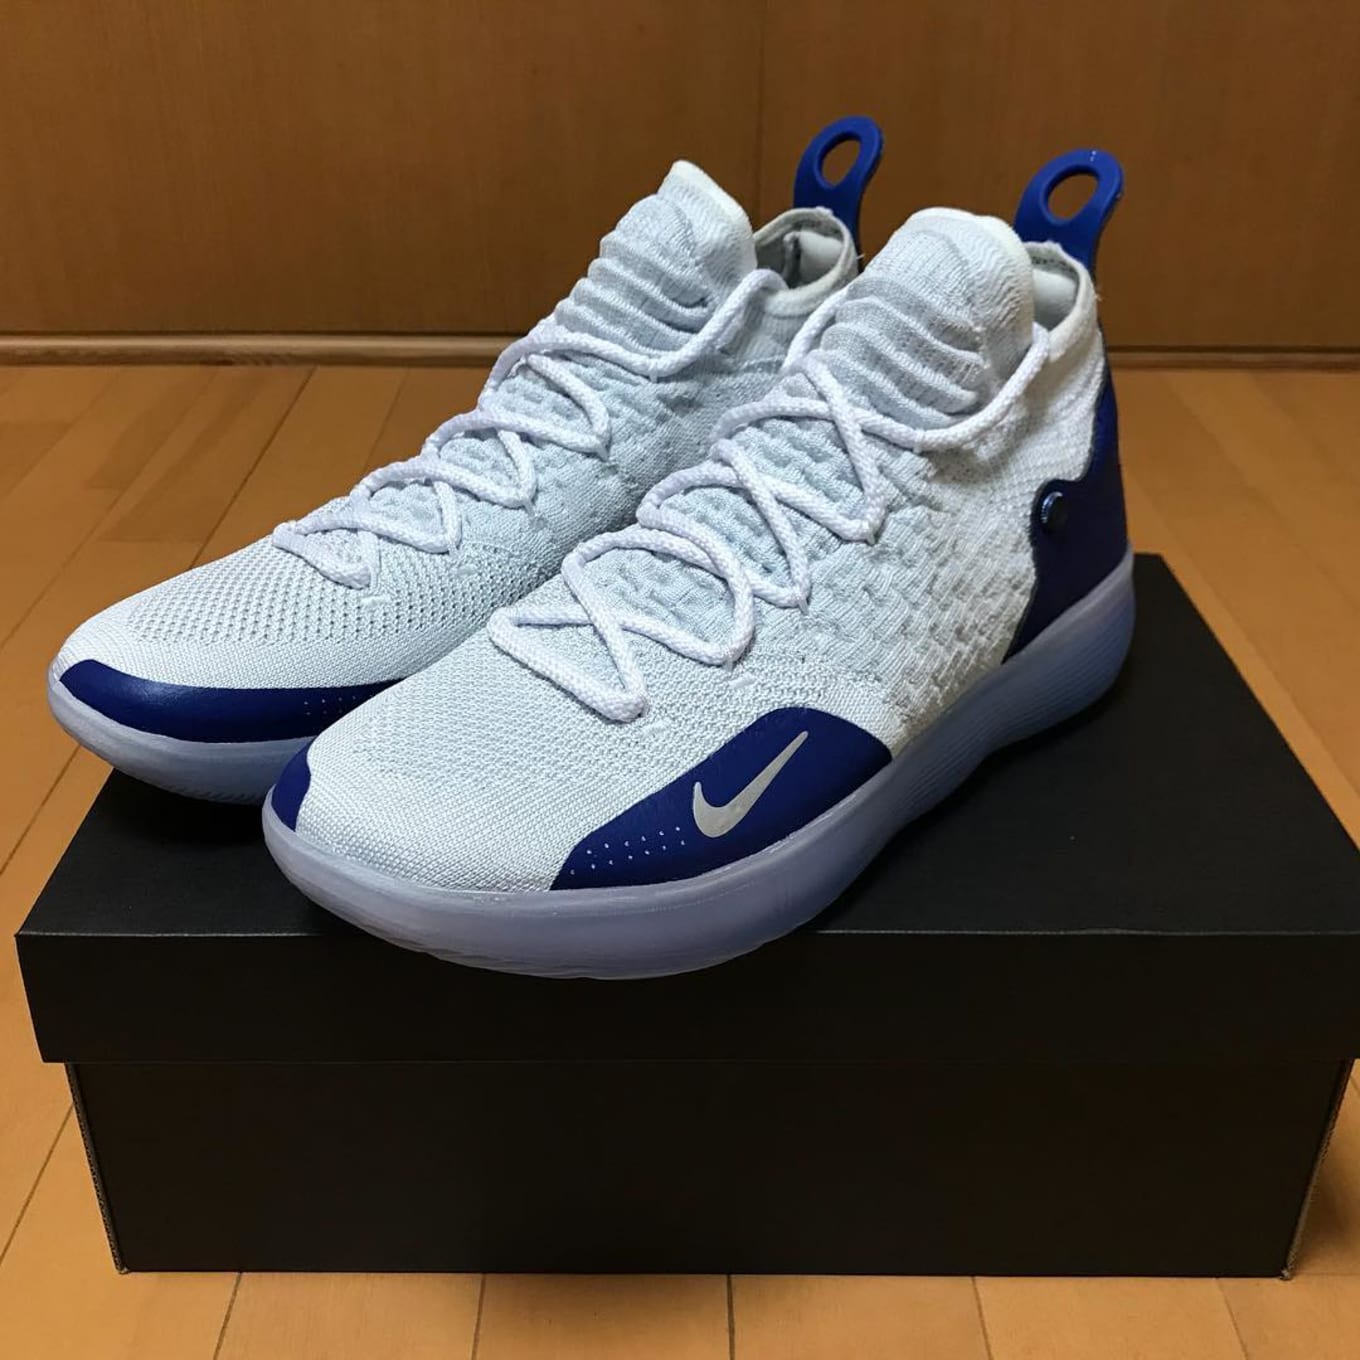 white and gold kd 11 online -